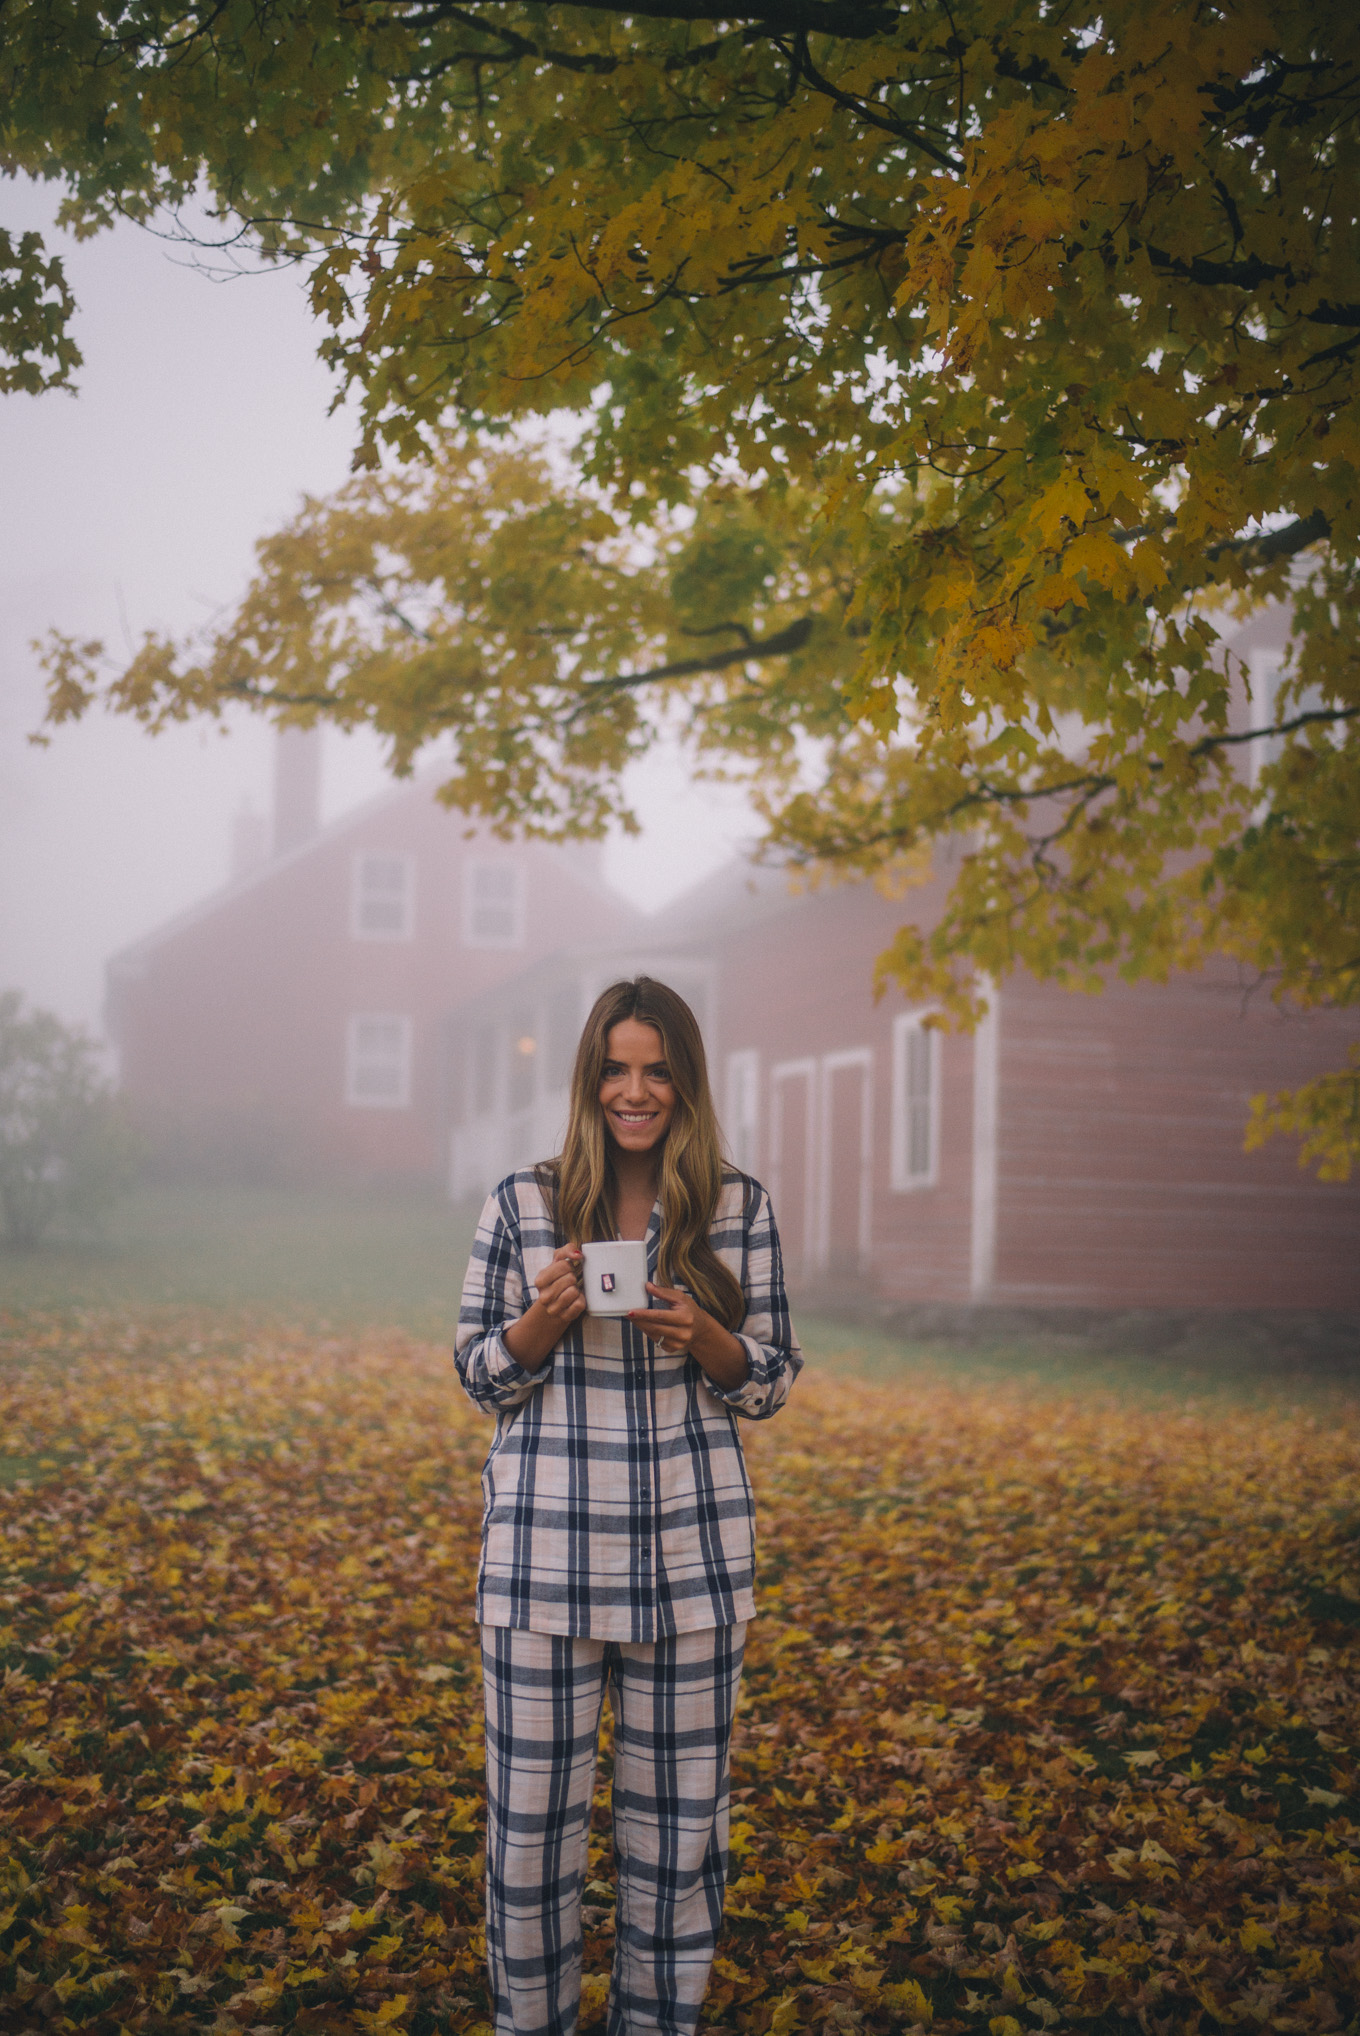 gmg-vermont-foggy-morning-1003412